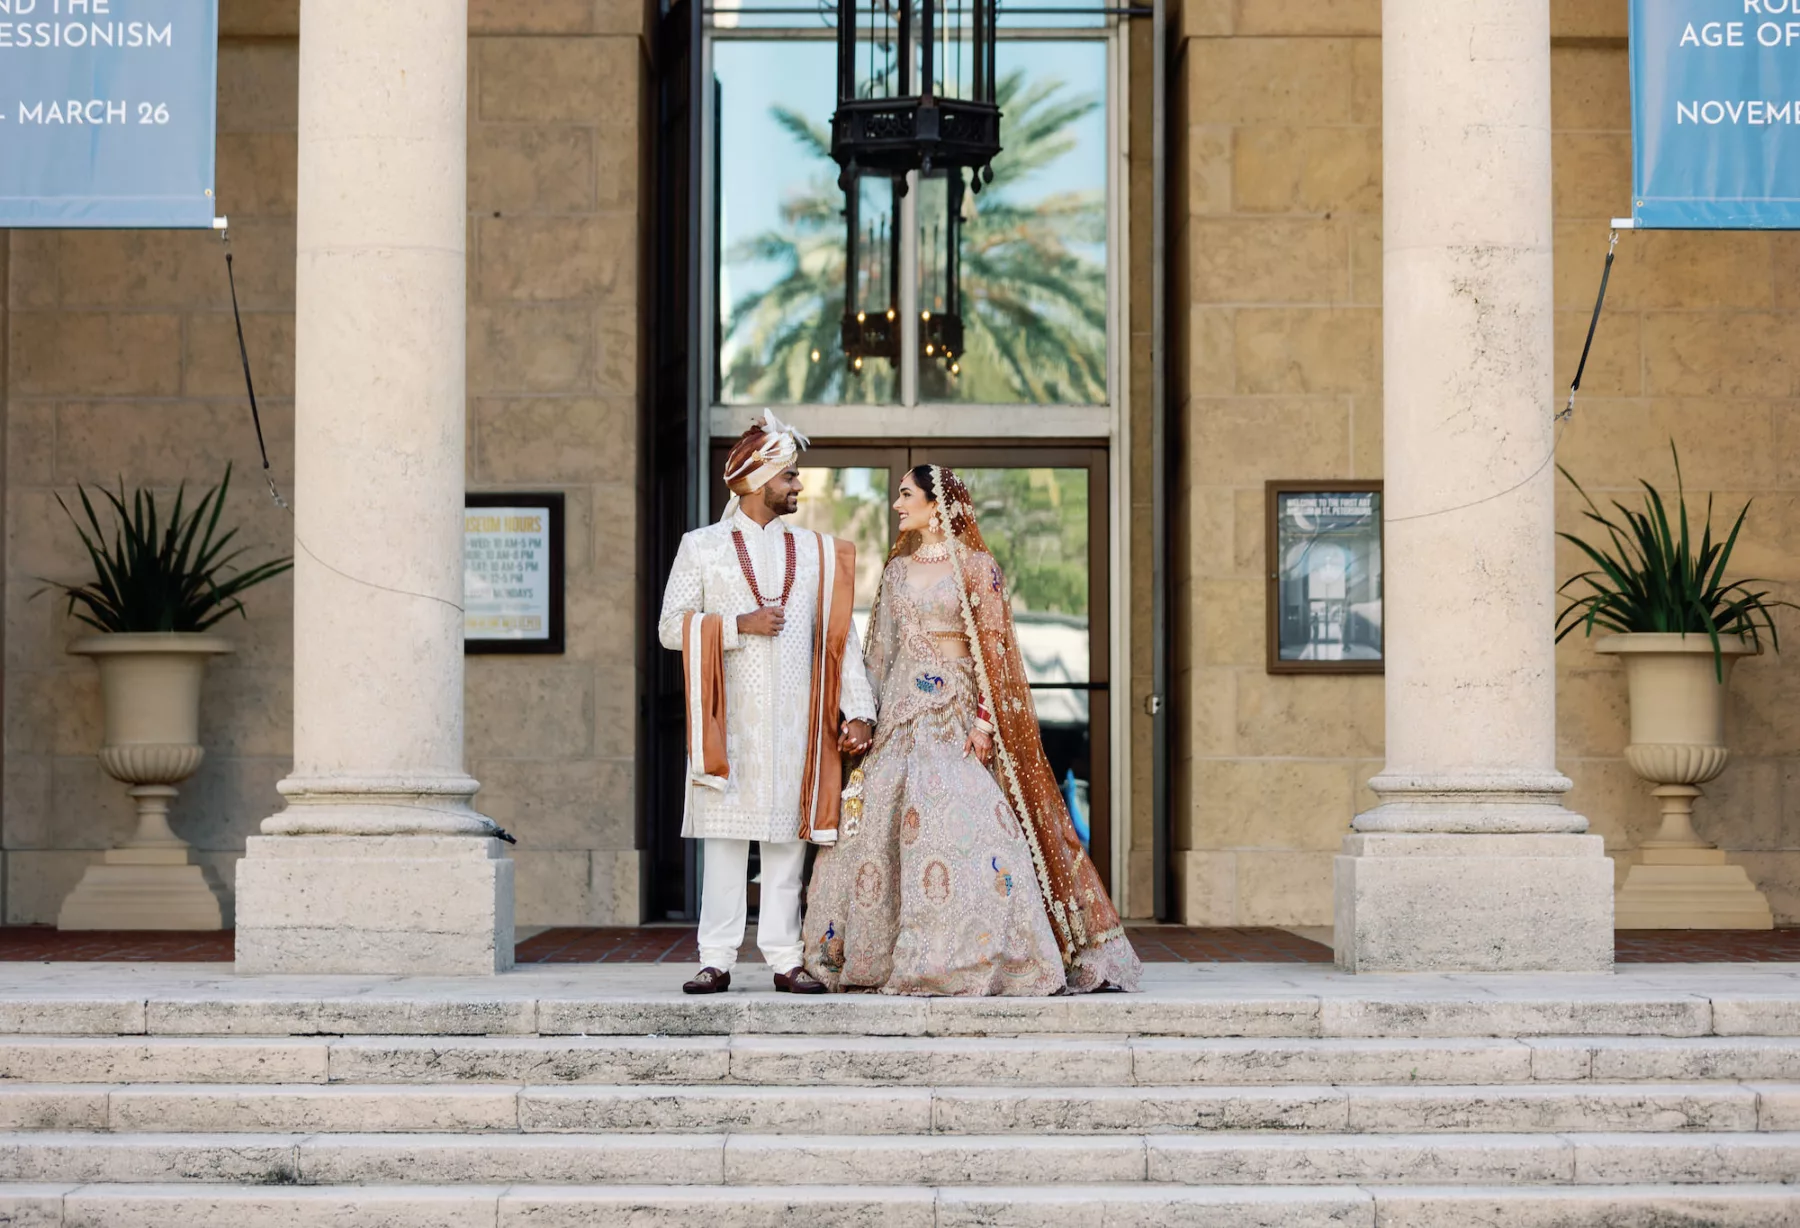 Bride and Groom First Look Wedding Portrait | Neutral Burnt Orange and Cream Beaded Rimple and Harpreet Lehenga Indian Wedding Dress Inspiration | White and Brown Groom's Sherwani Wedding Attire Ideas | St Pete Event Venue Museum of Fine Arts | Hair and Makeup Artist Michele Renee The Studio | Planner Coastal Coordinating